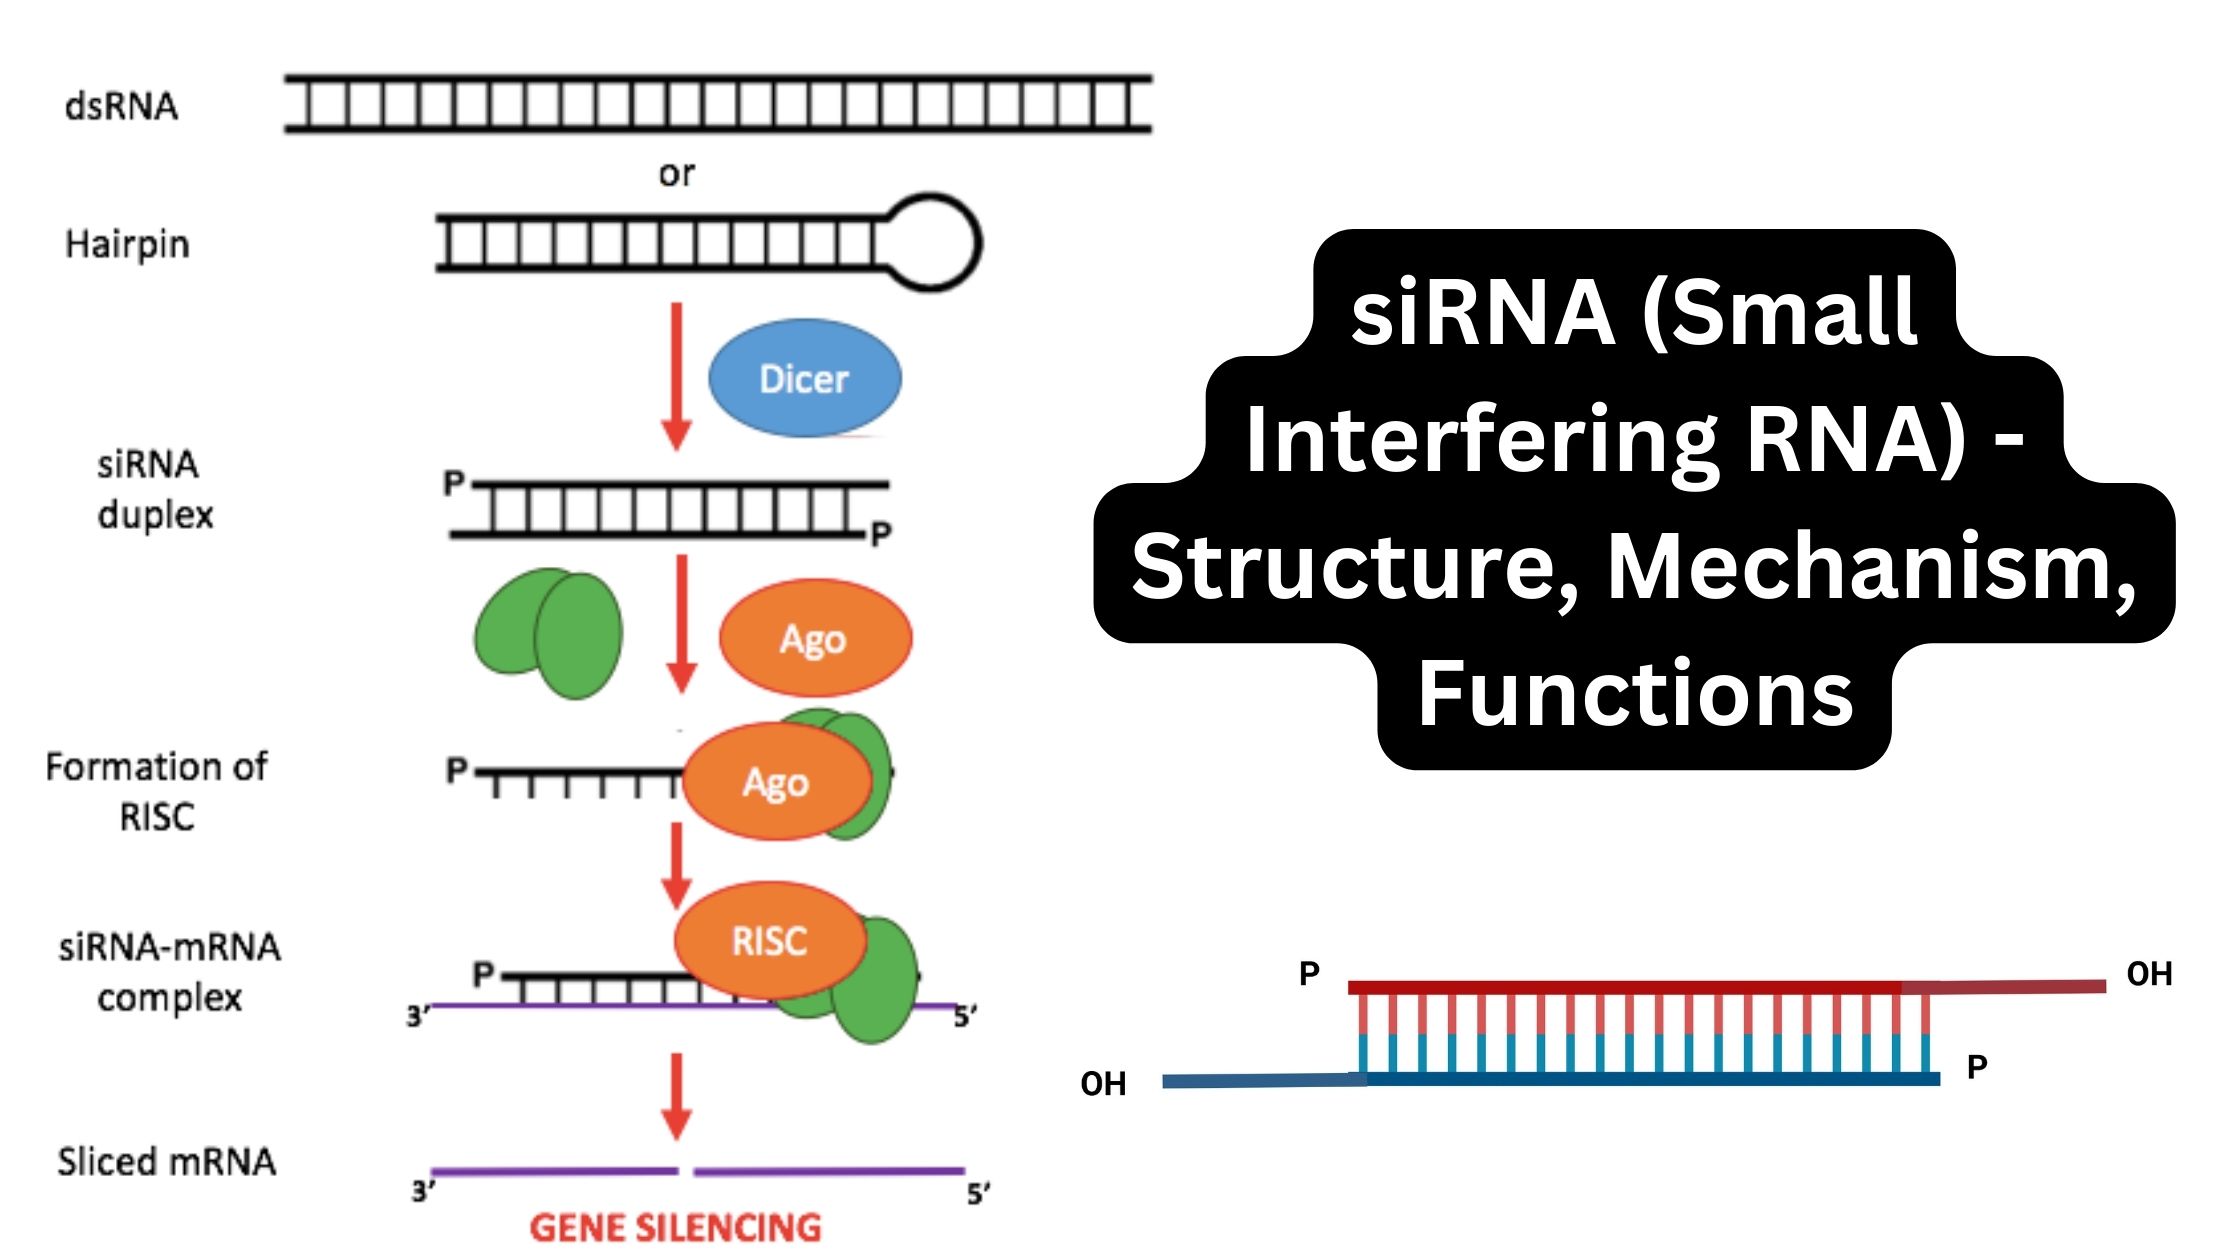 siRNA (Small Interfering RNA) - Structure, Mechanism, Functions